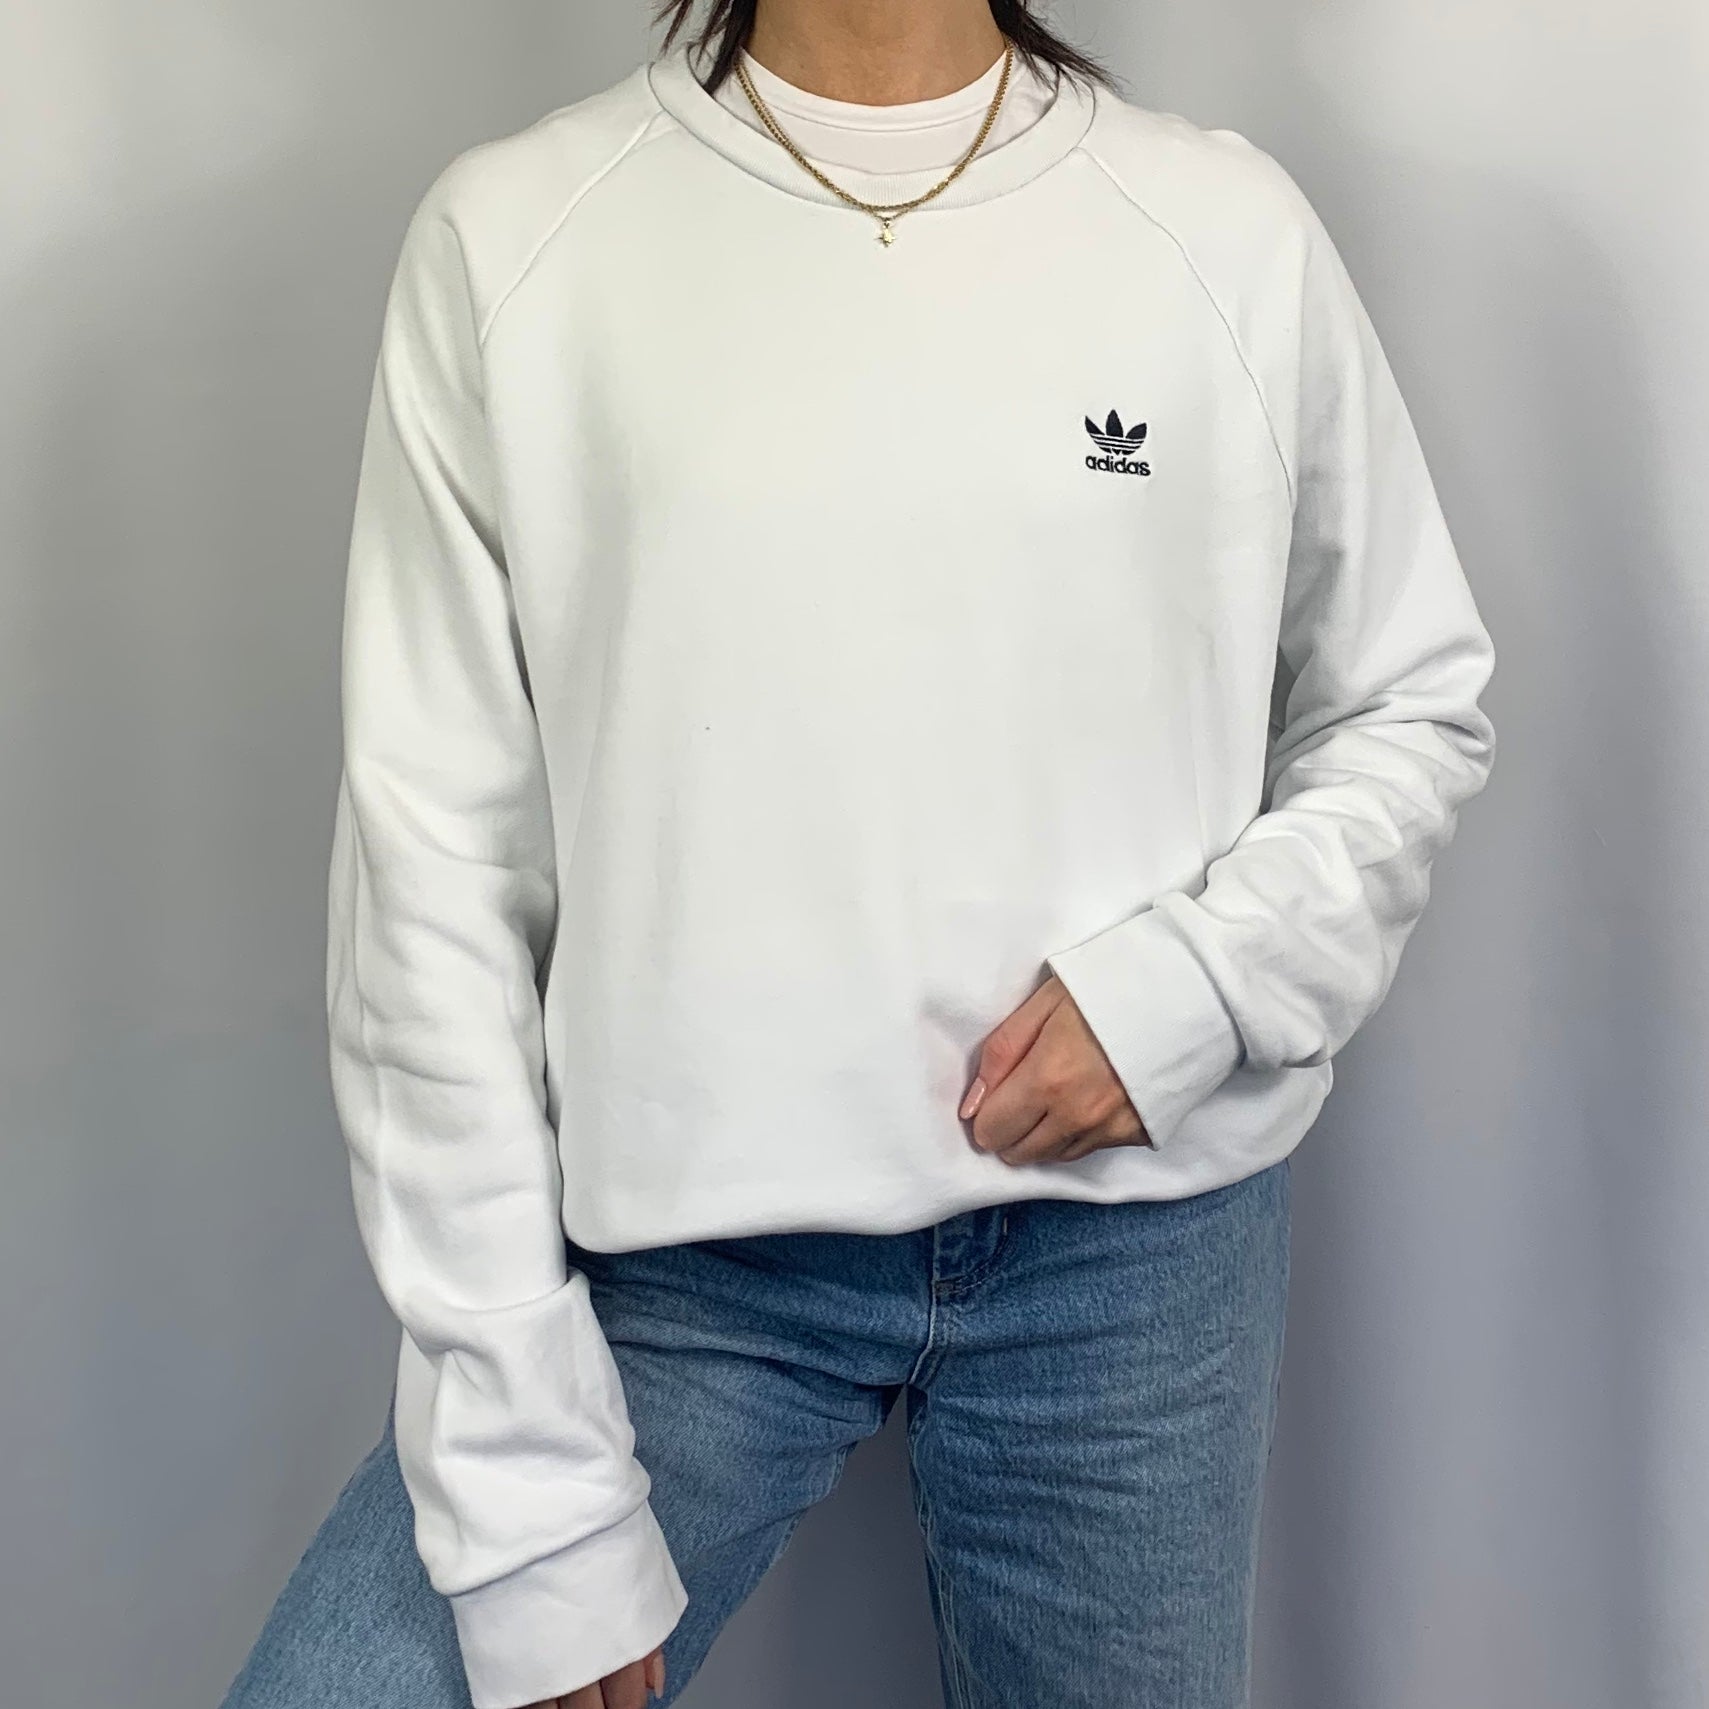 Vintage Adidas Originals Sweatshirt With Embroidered Logo - Women's Large/ Men's Small